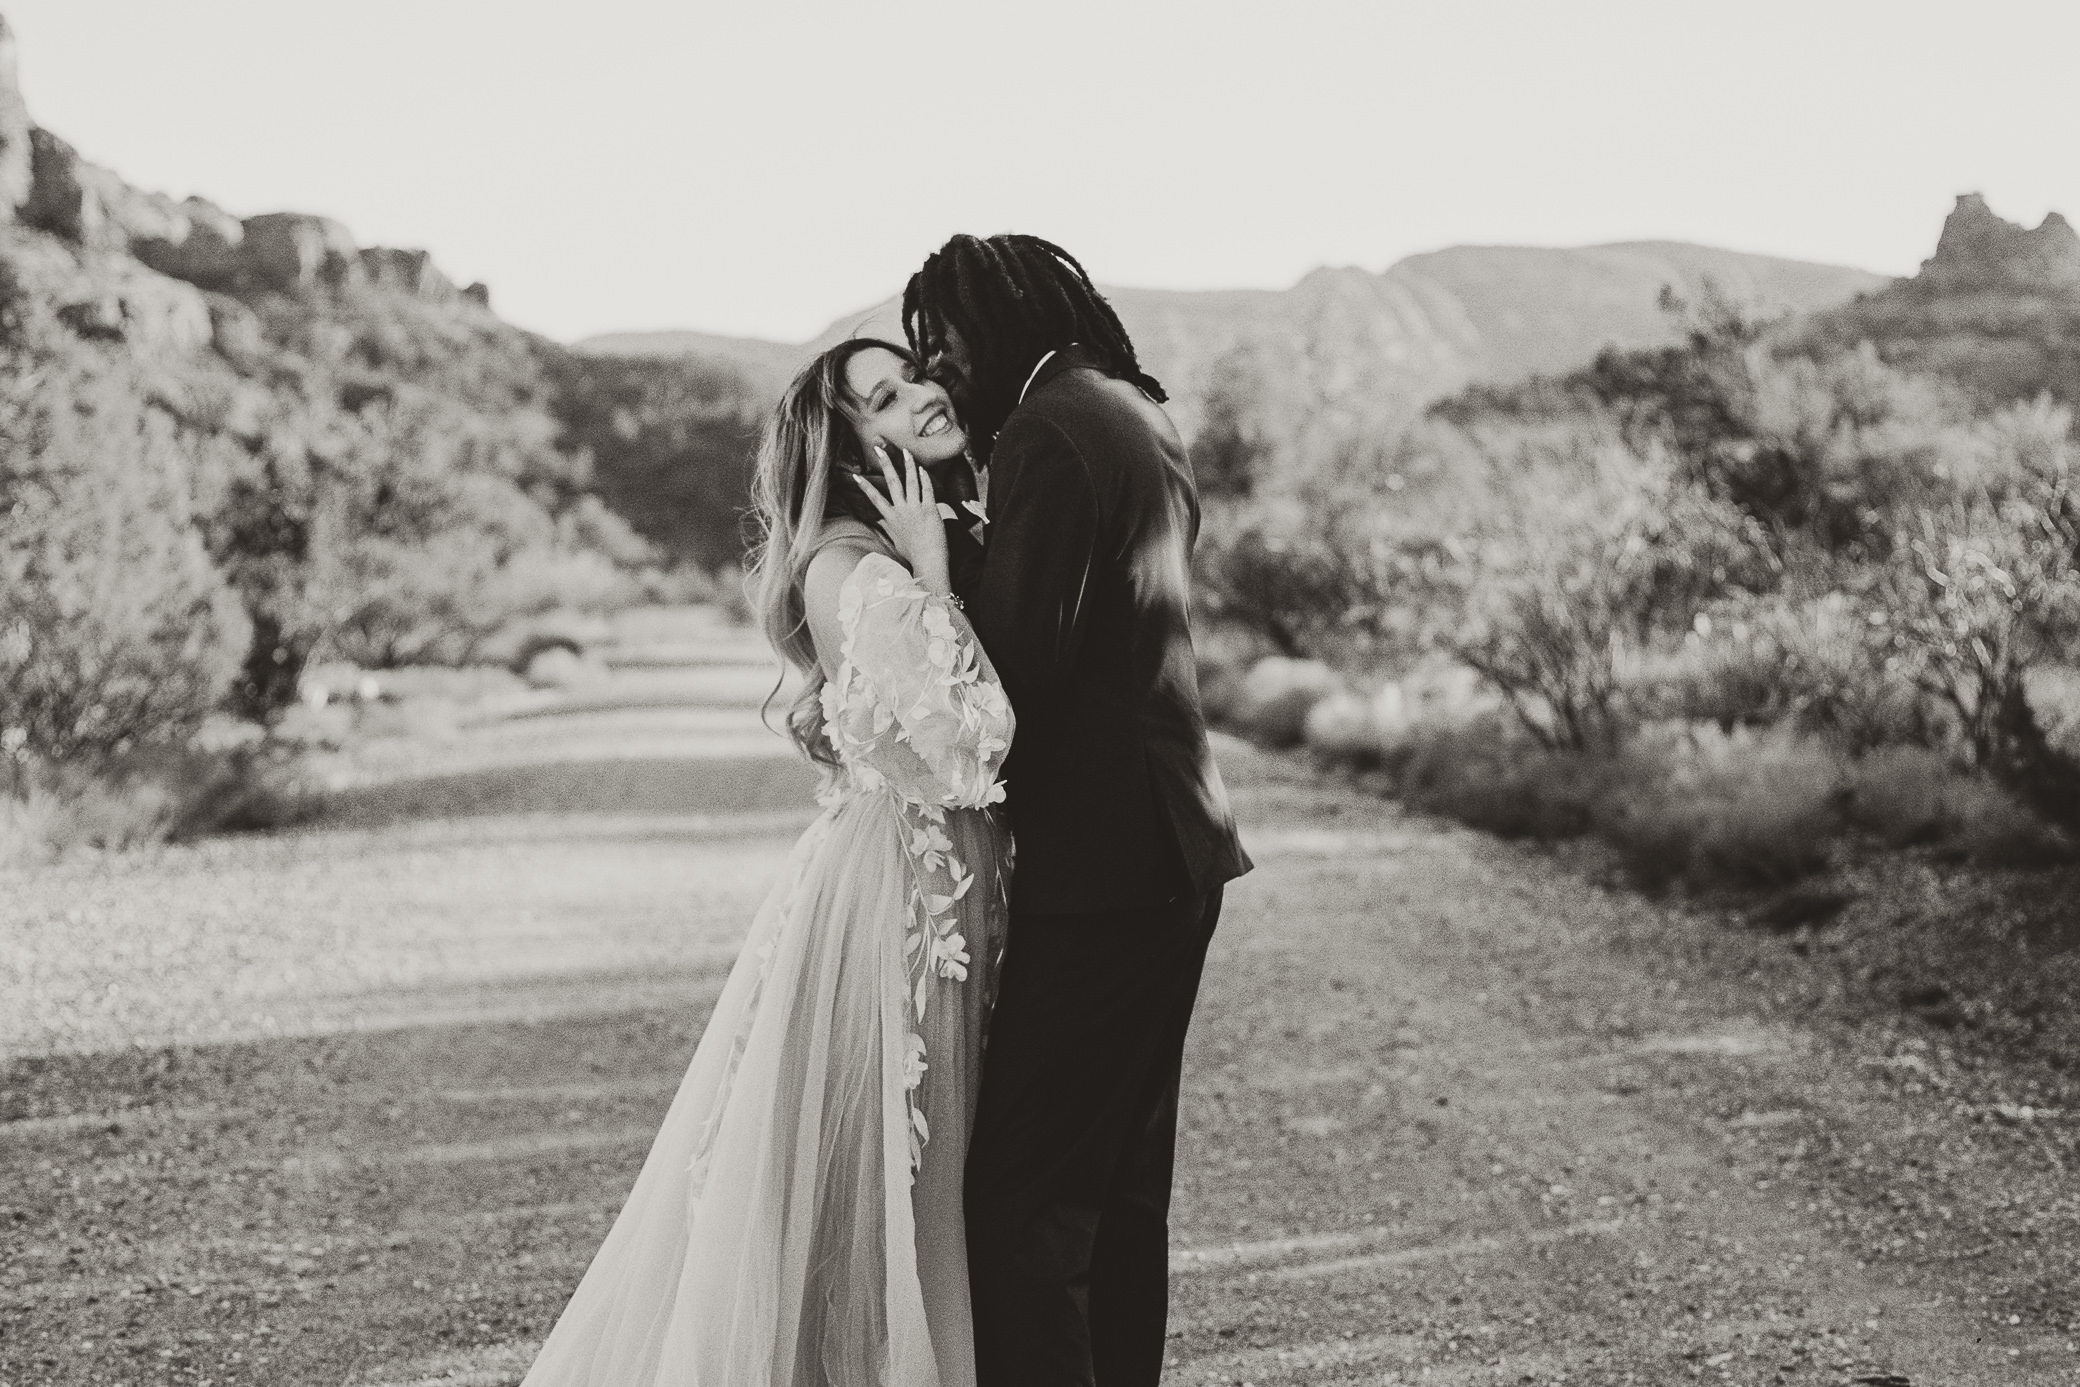 Film photo of an elopement couple on a road in Sedona, Arizona.